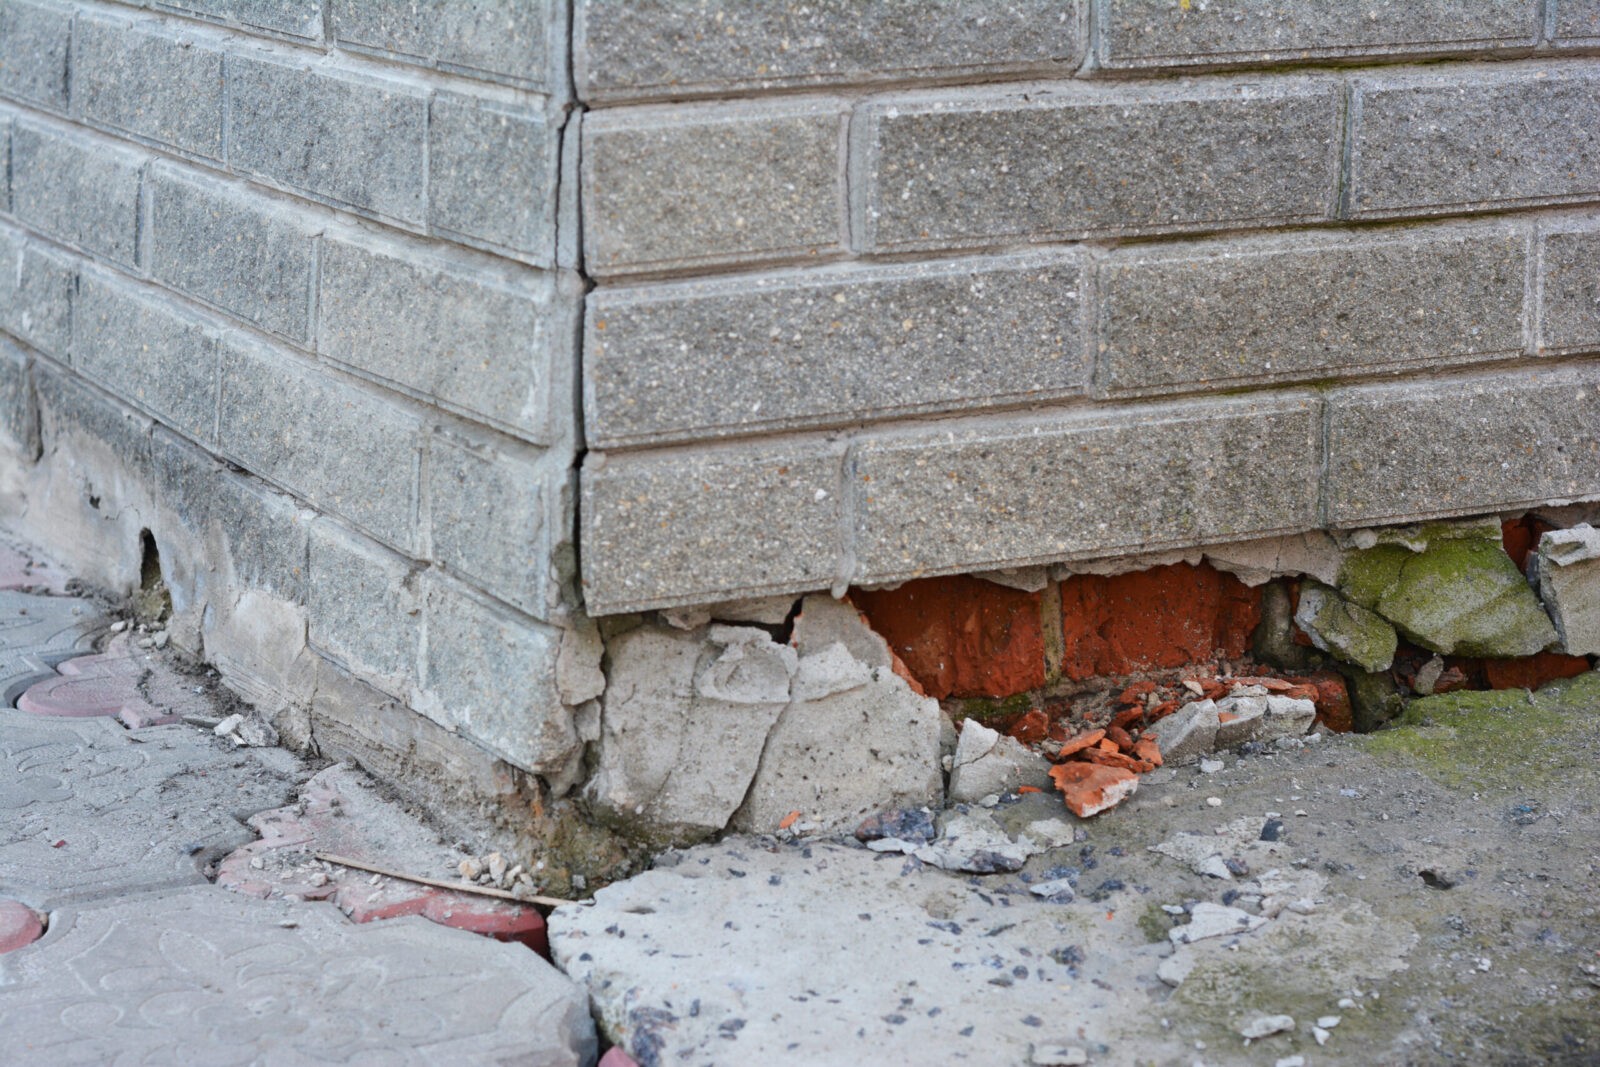 Foundation Repair Experts in the San Francisco Bay Area